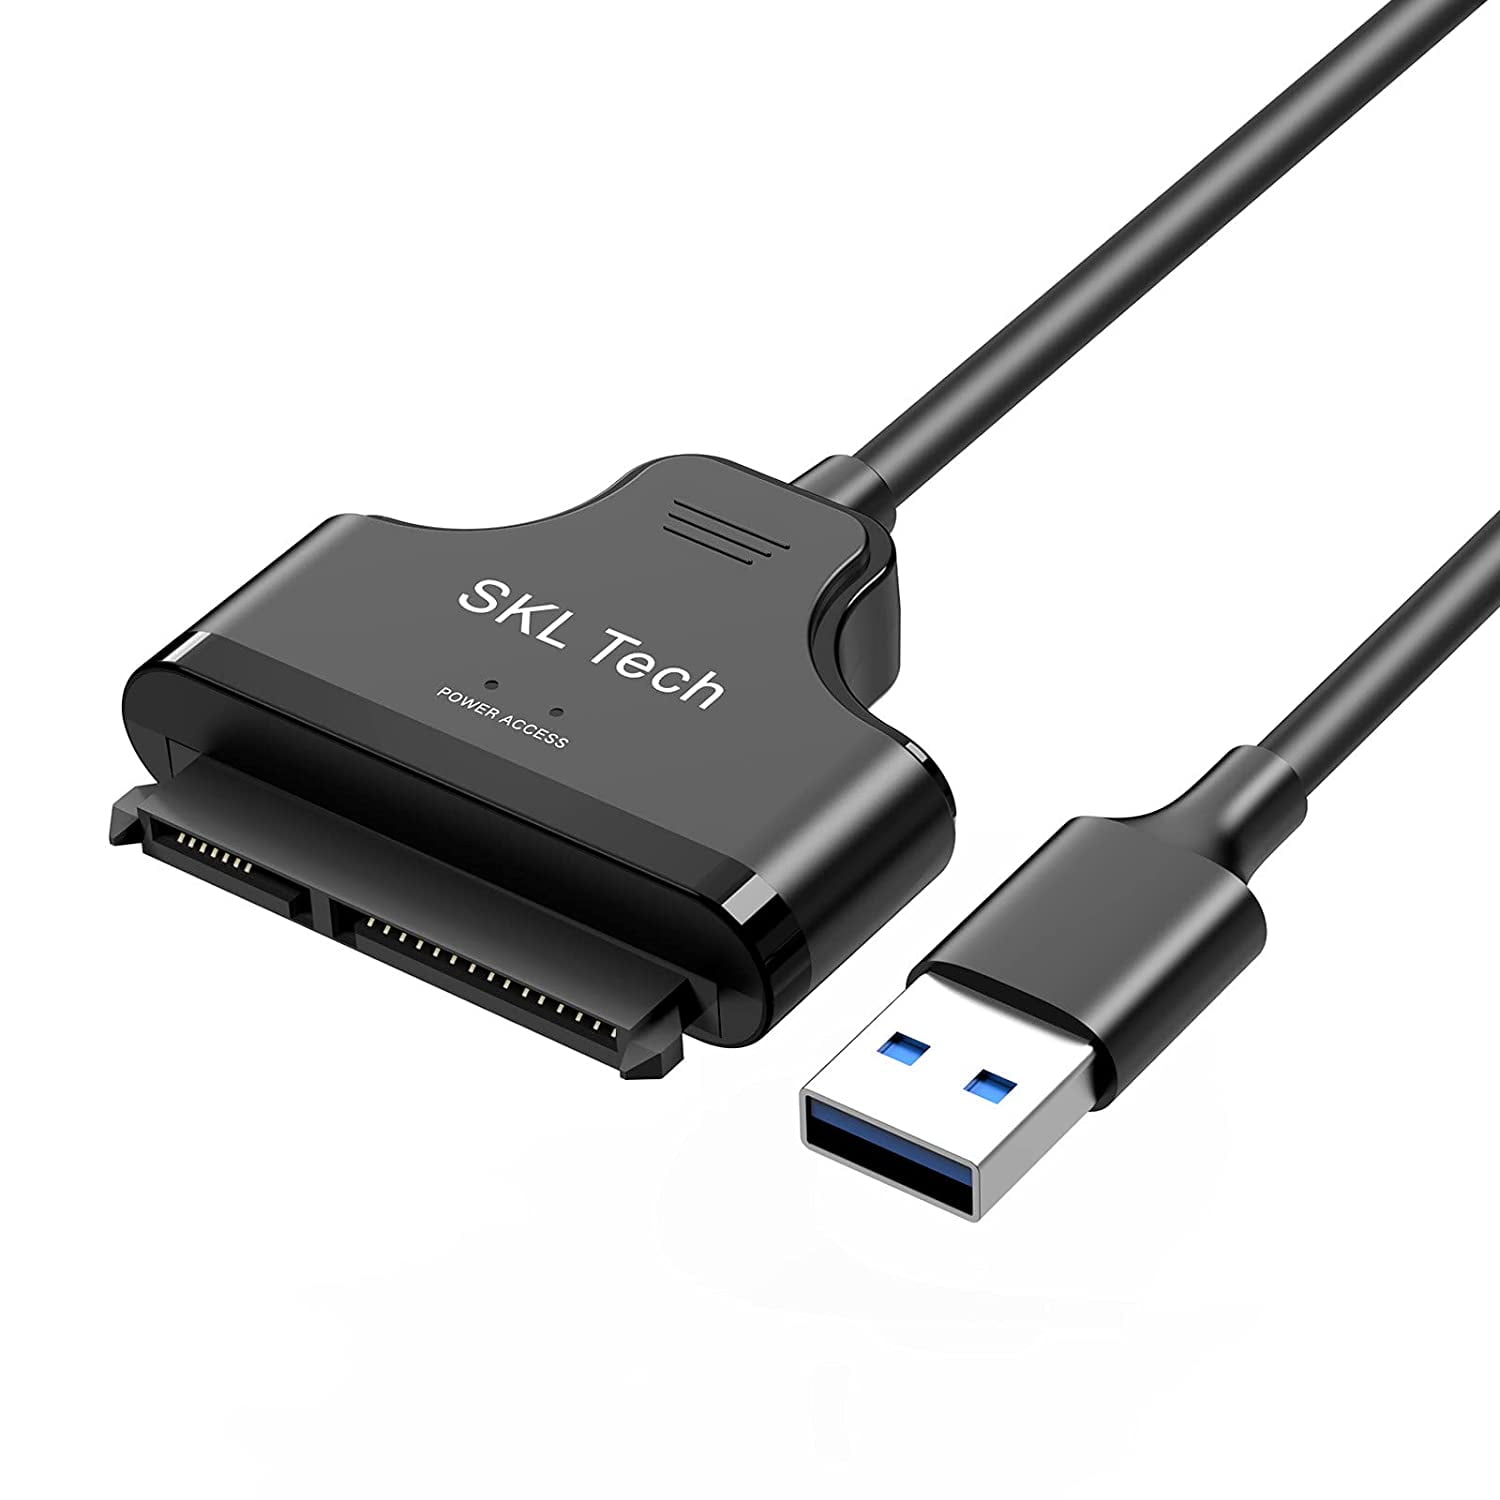 TVstation Tilgivende indad USB 3.0 SATA III Hard Drive Adapter Cable, SATA to USB Adapter Cable for  2.5 inch SSD & HDD, Support UASP, 9 inch, Black… - Walmart.com